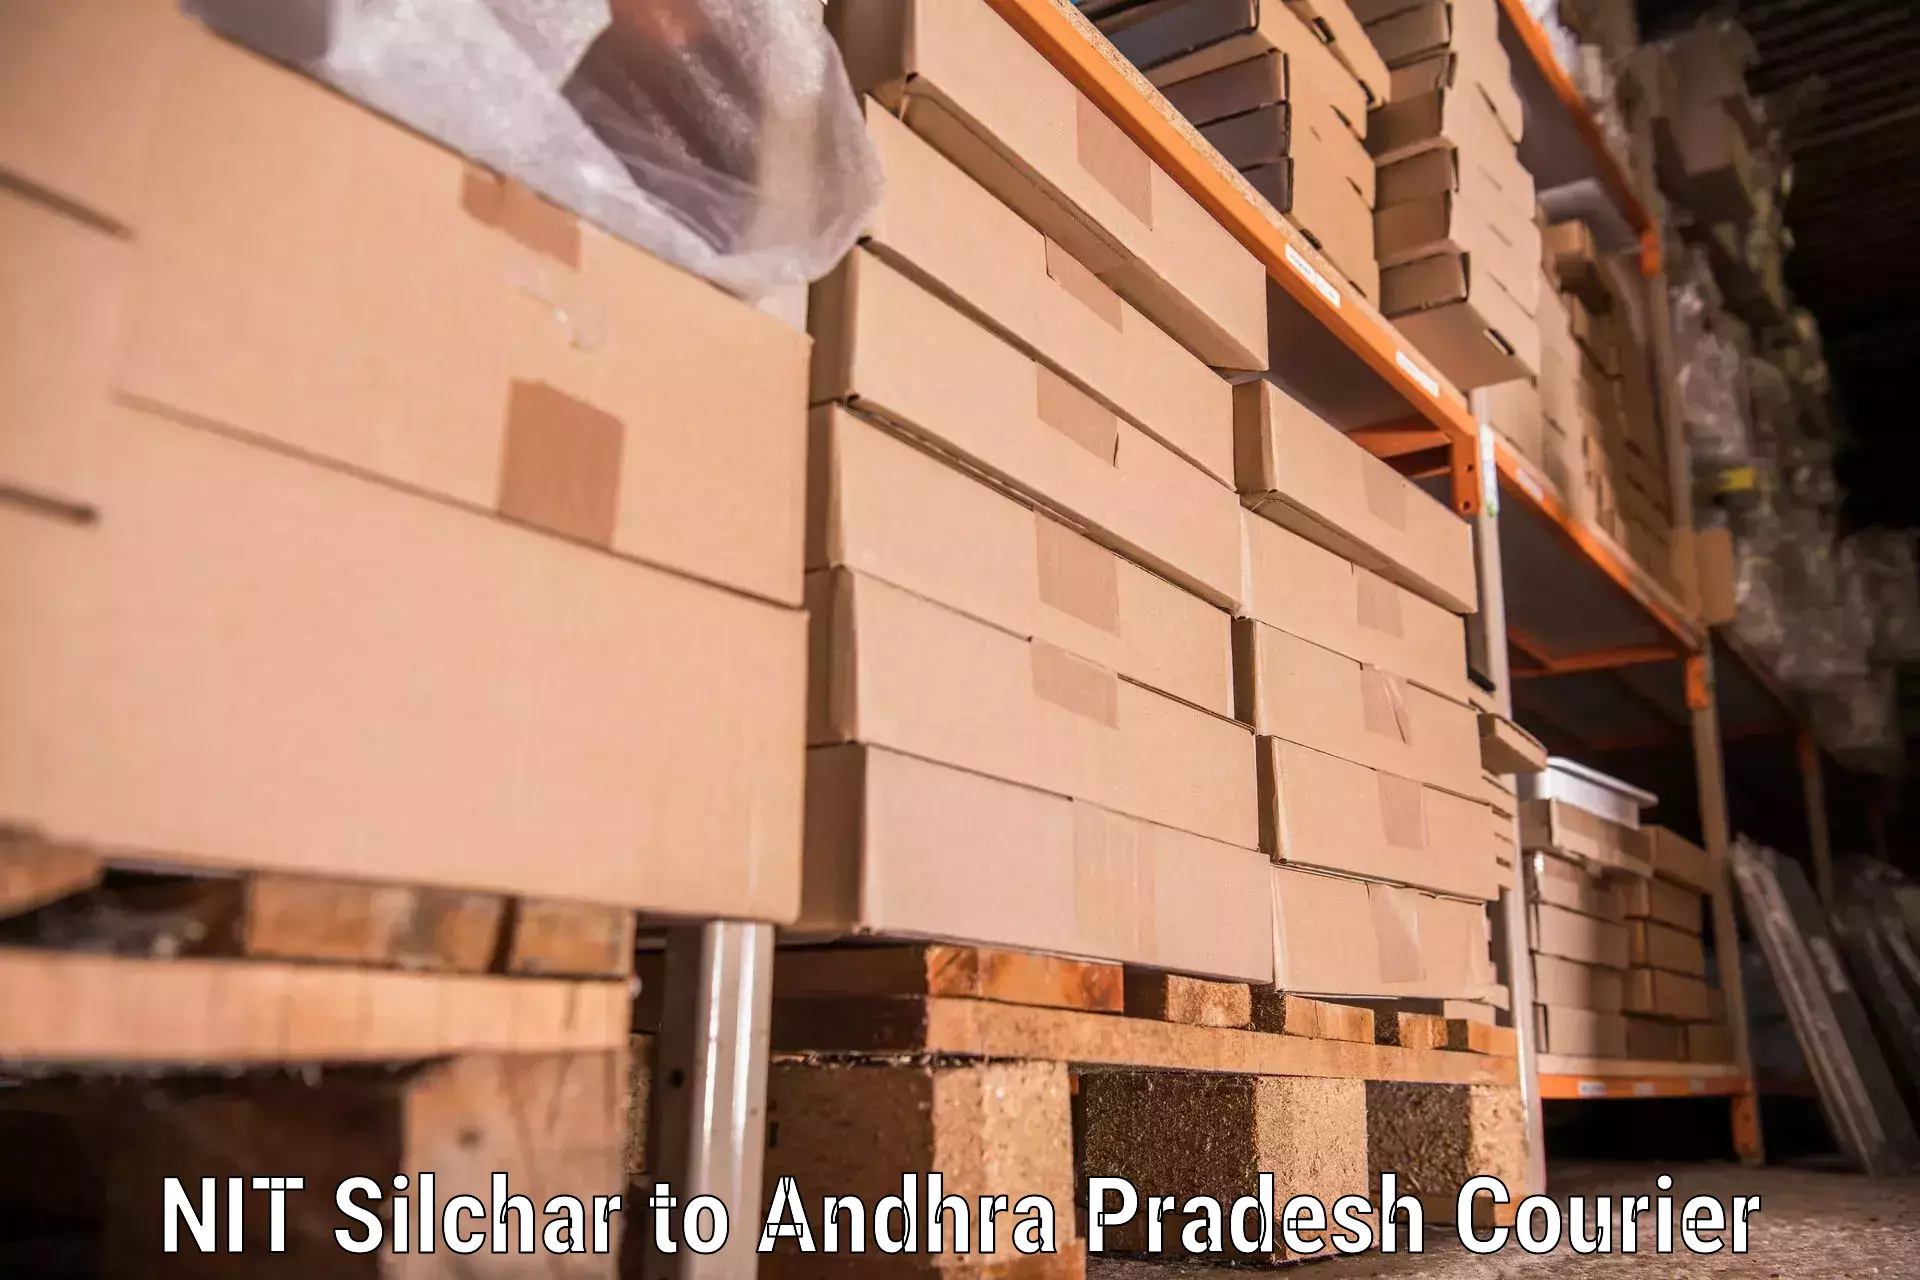 Furniture transport experts NIT Silchar to Addateegala